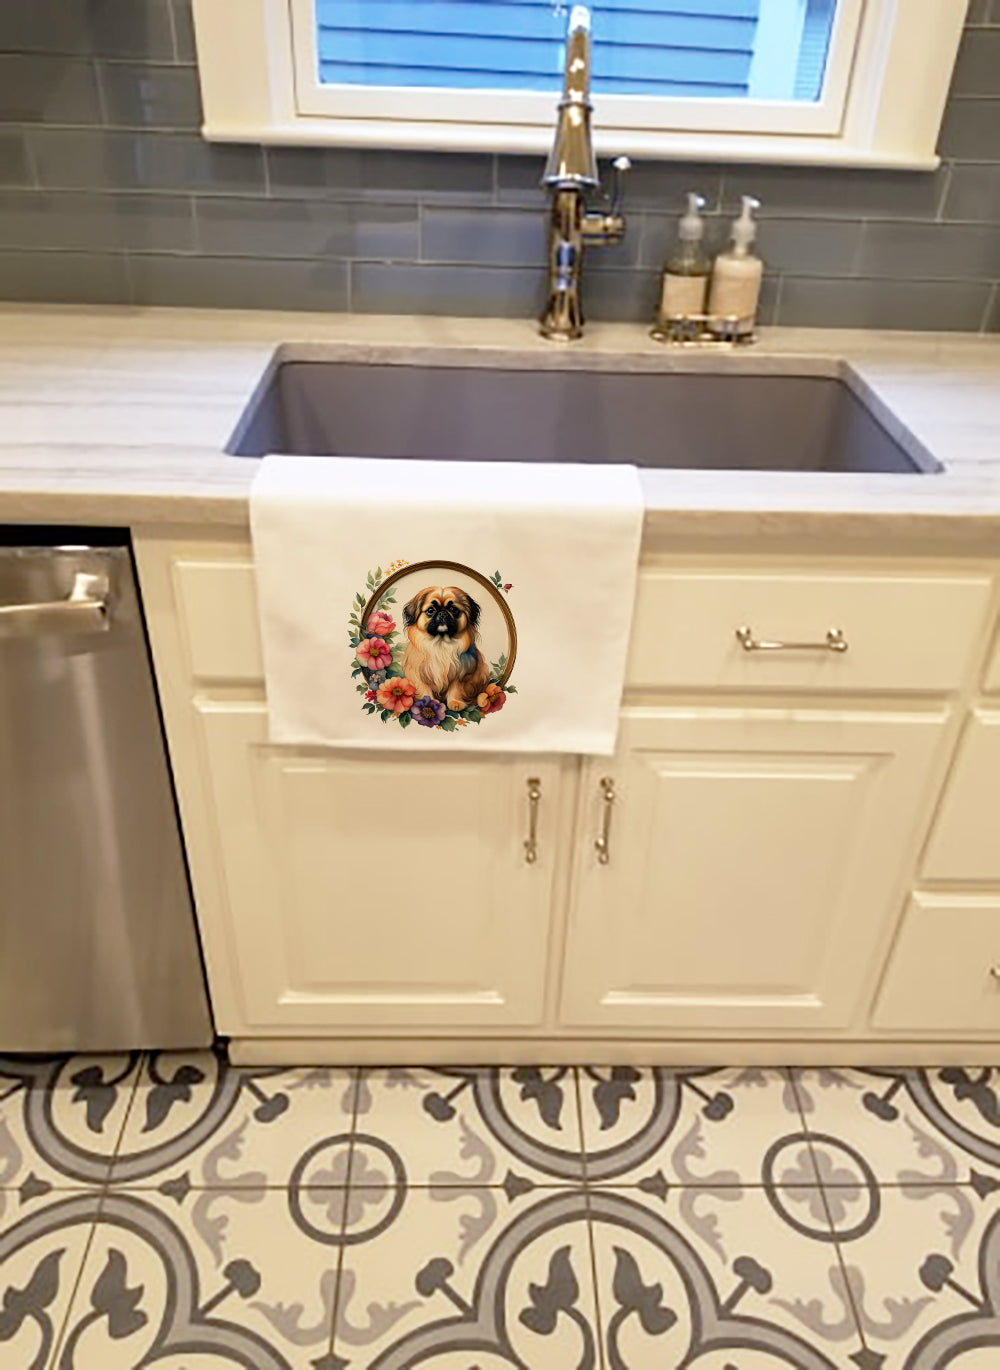 Buy this Pekingese and Flowers Kitchen Towel Set of 2